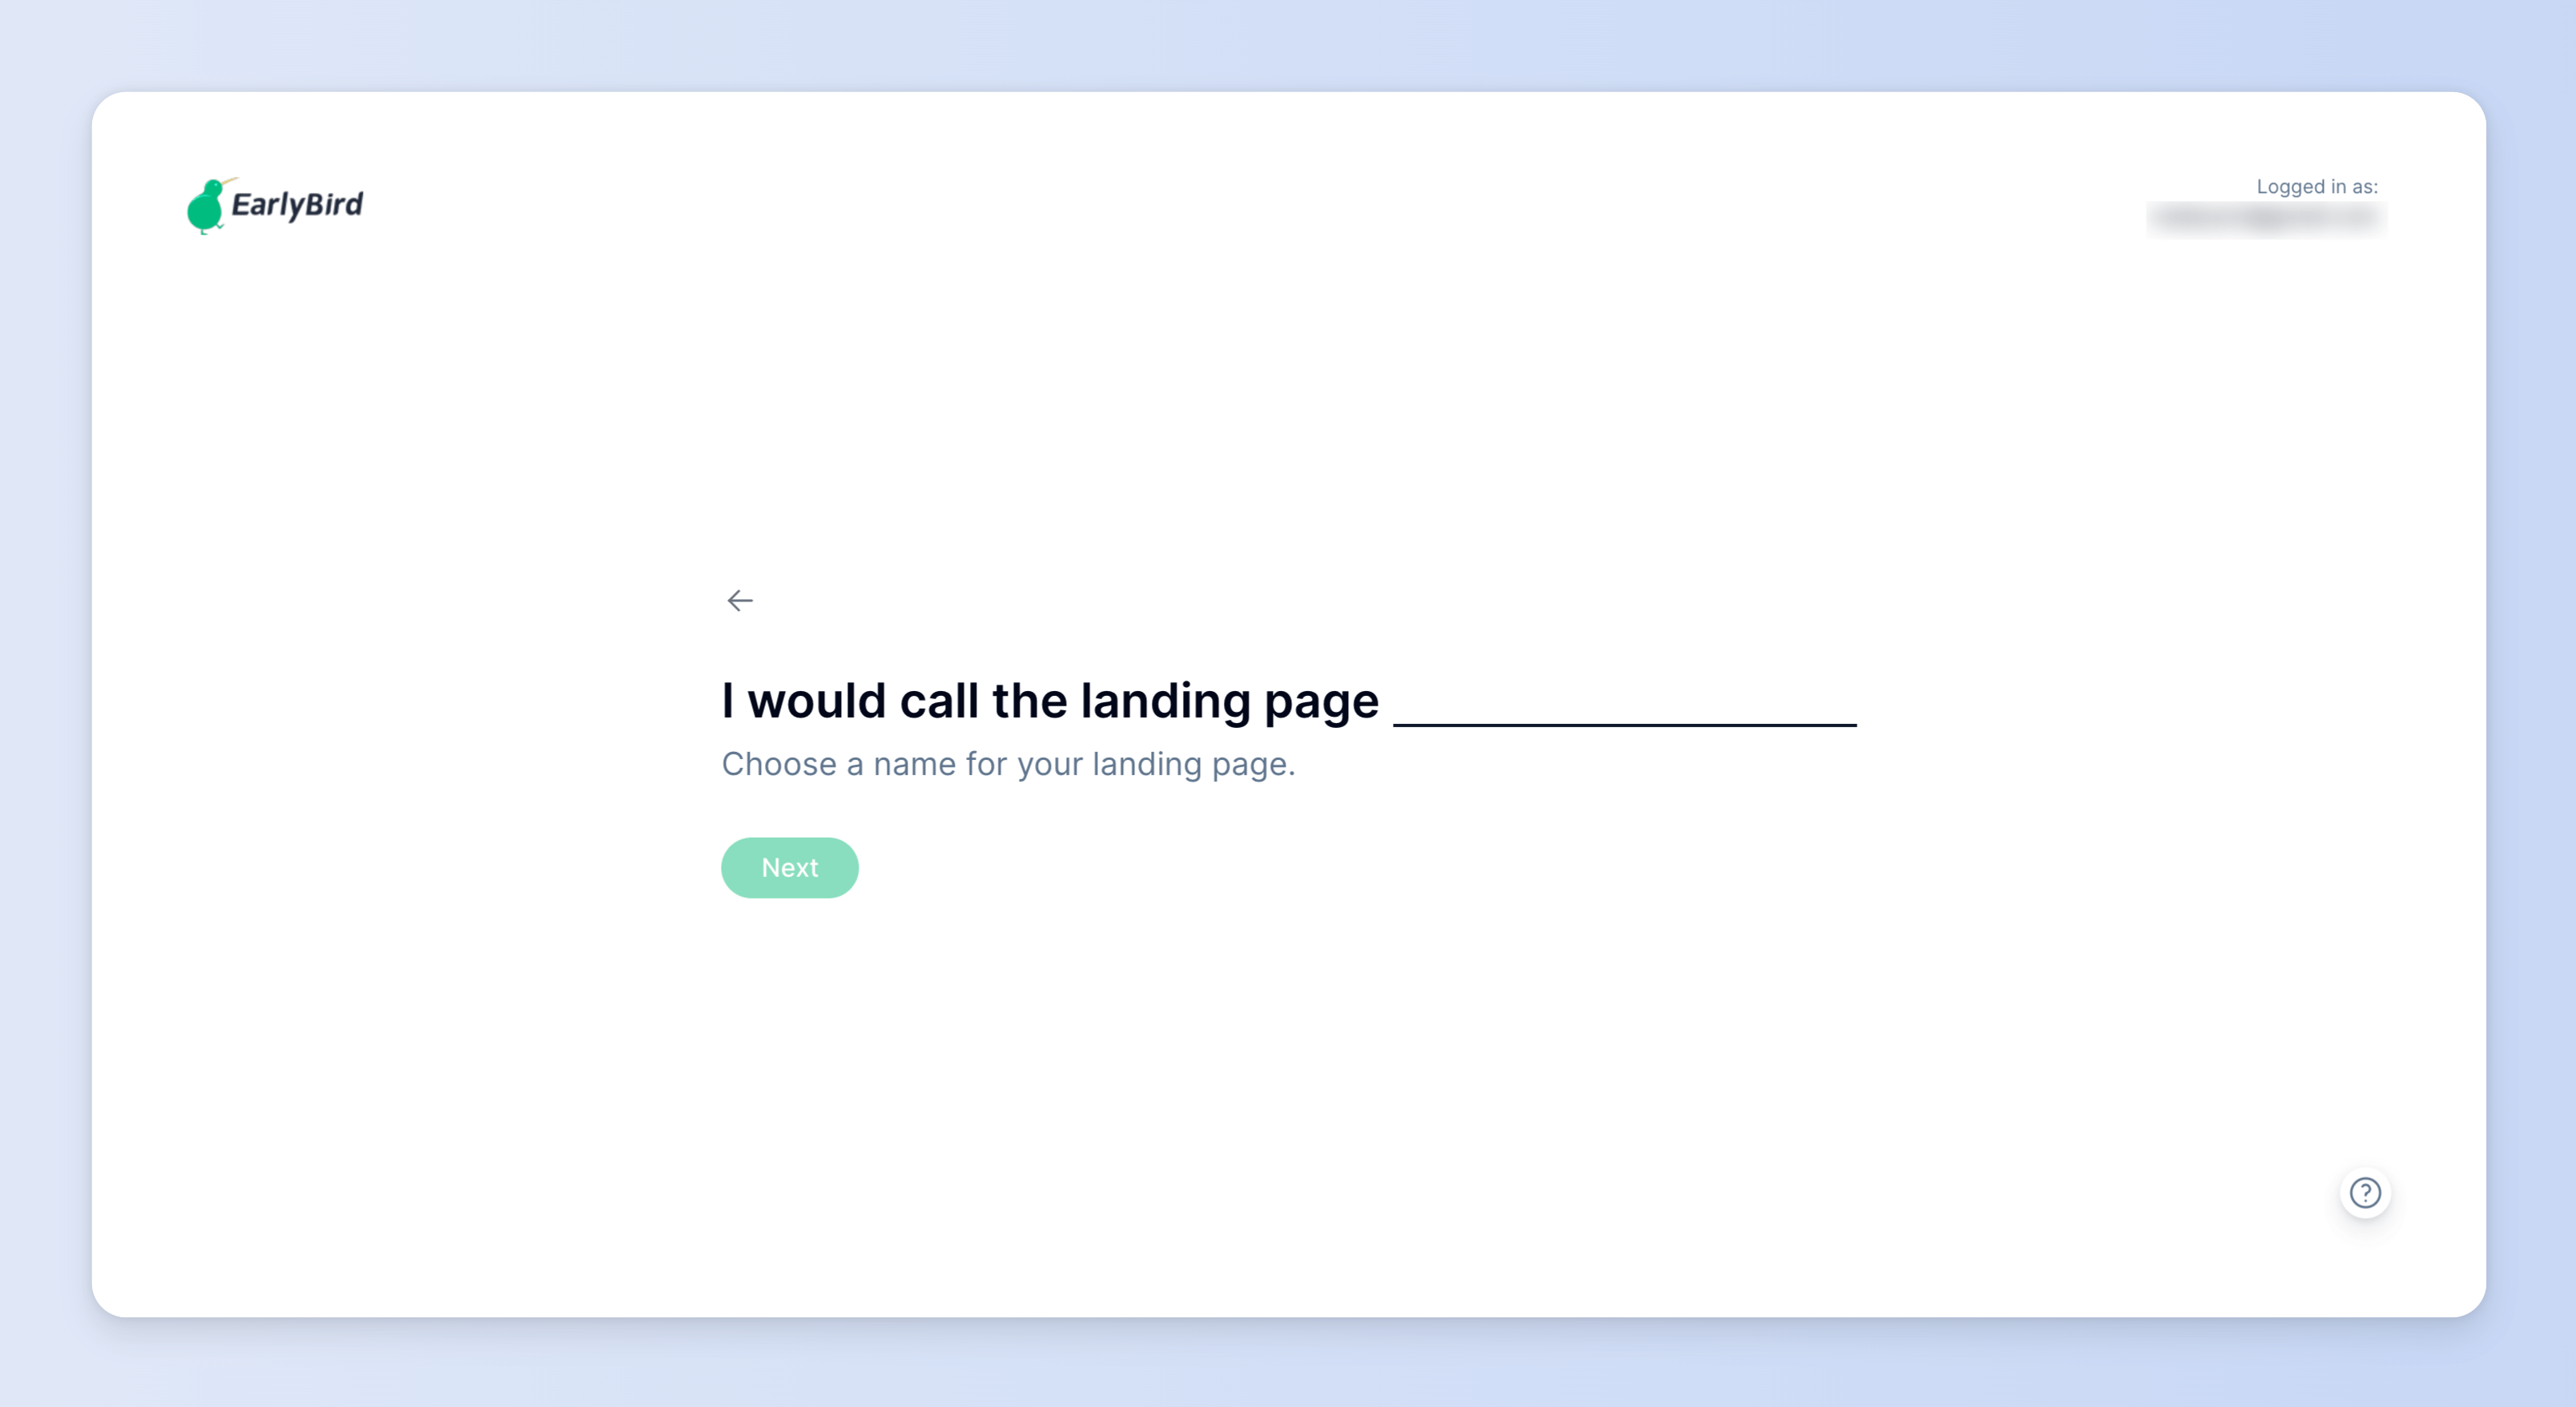 Give your landing page a name